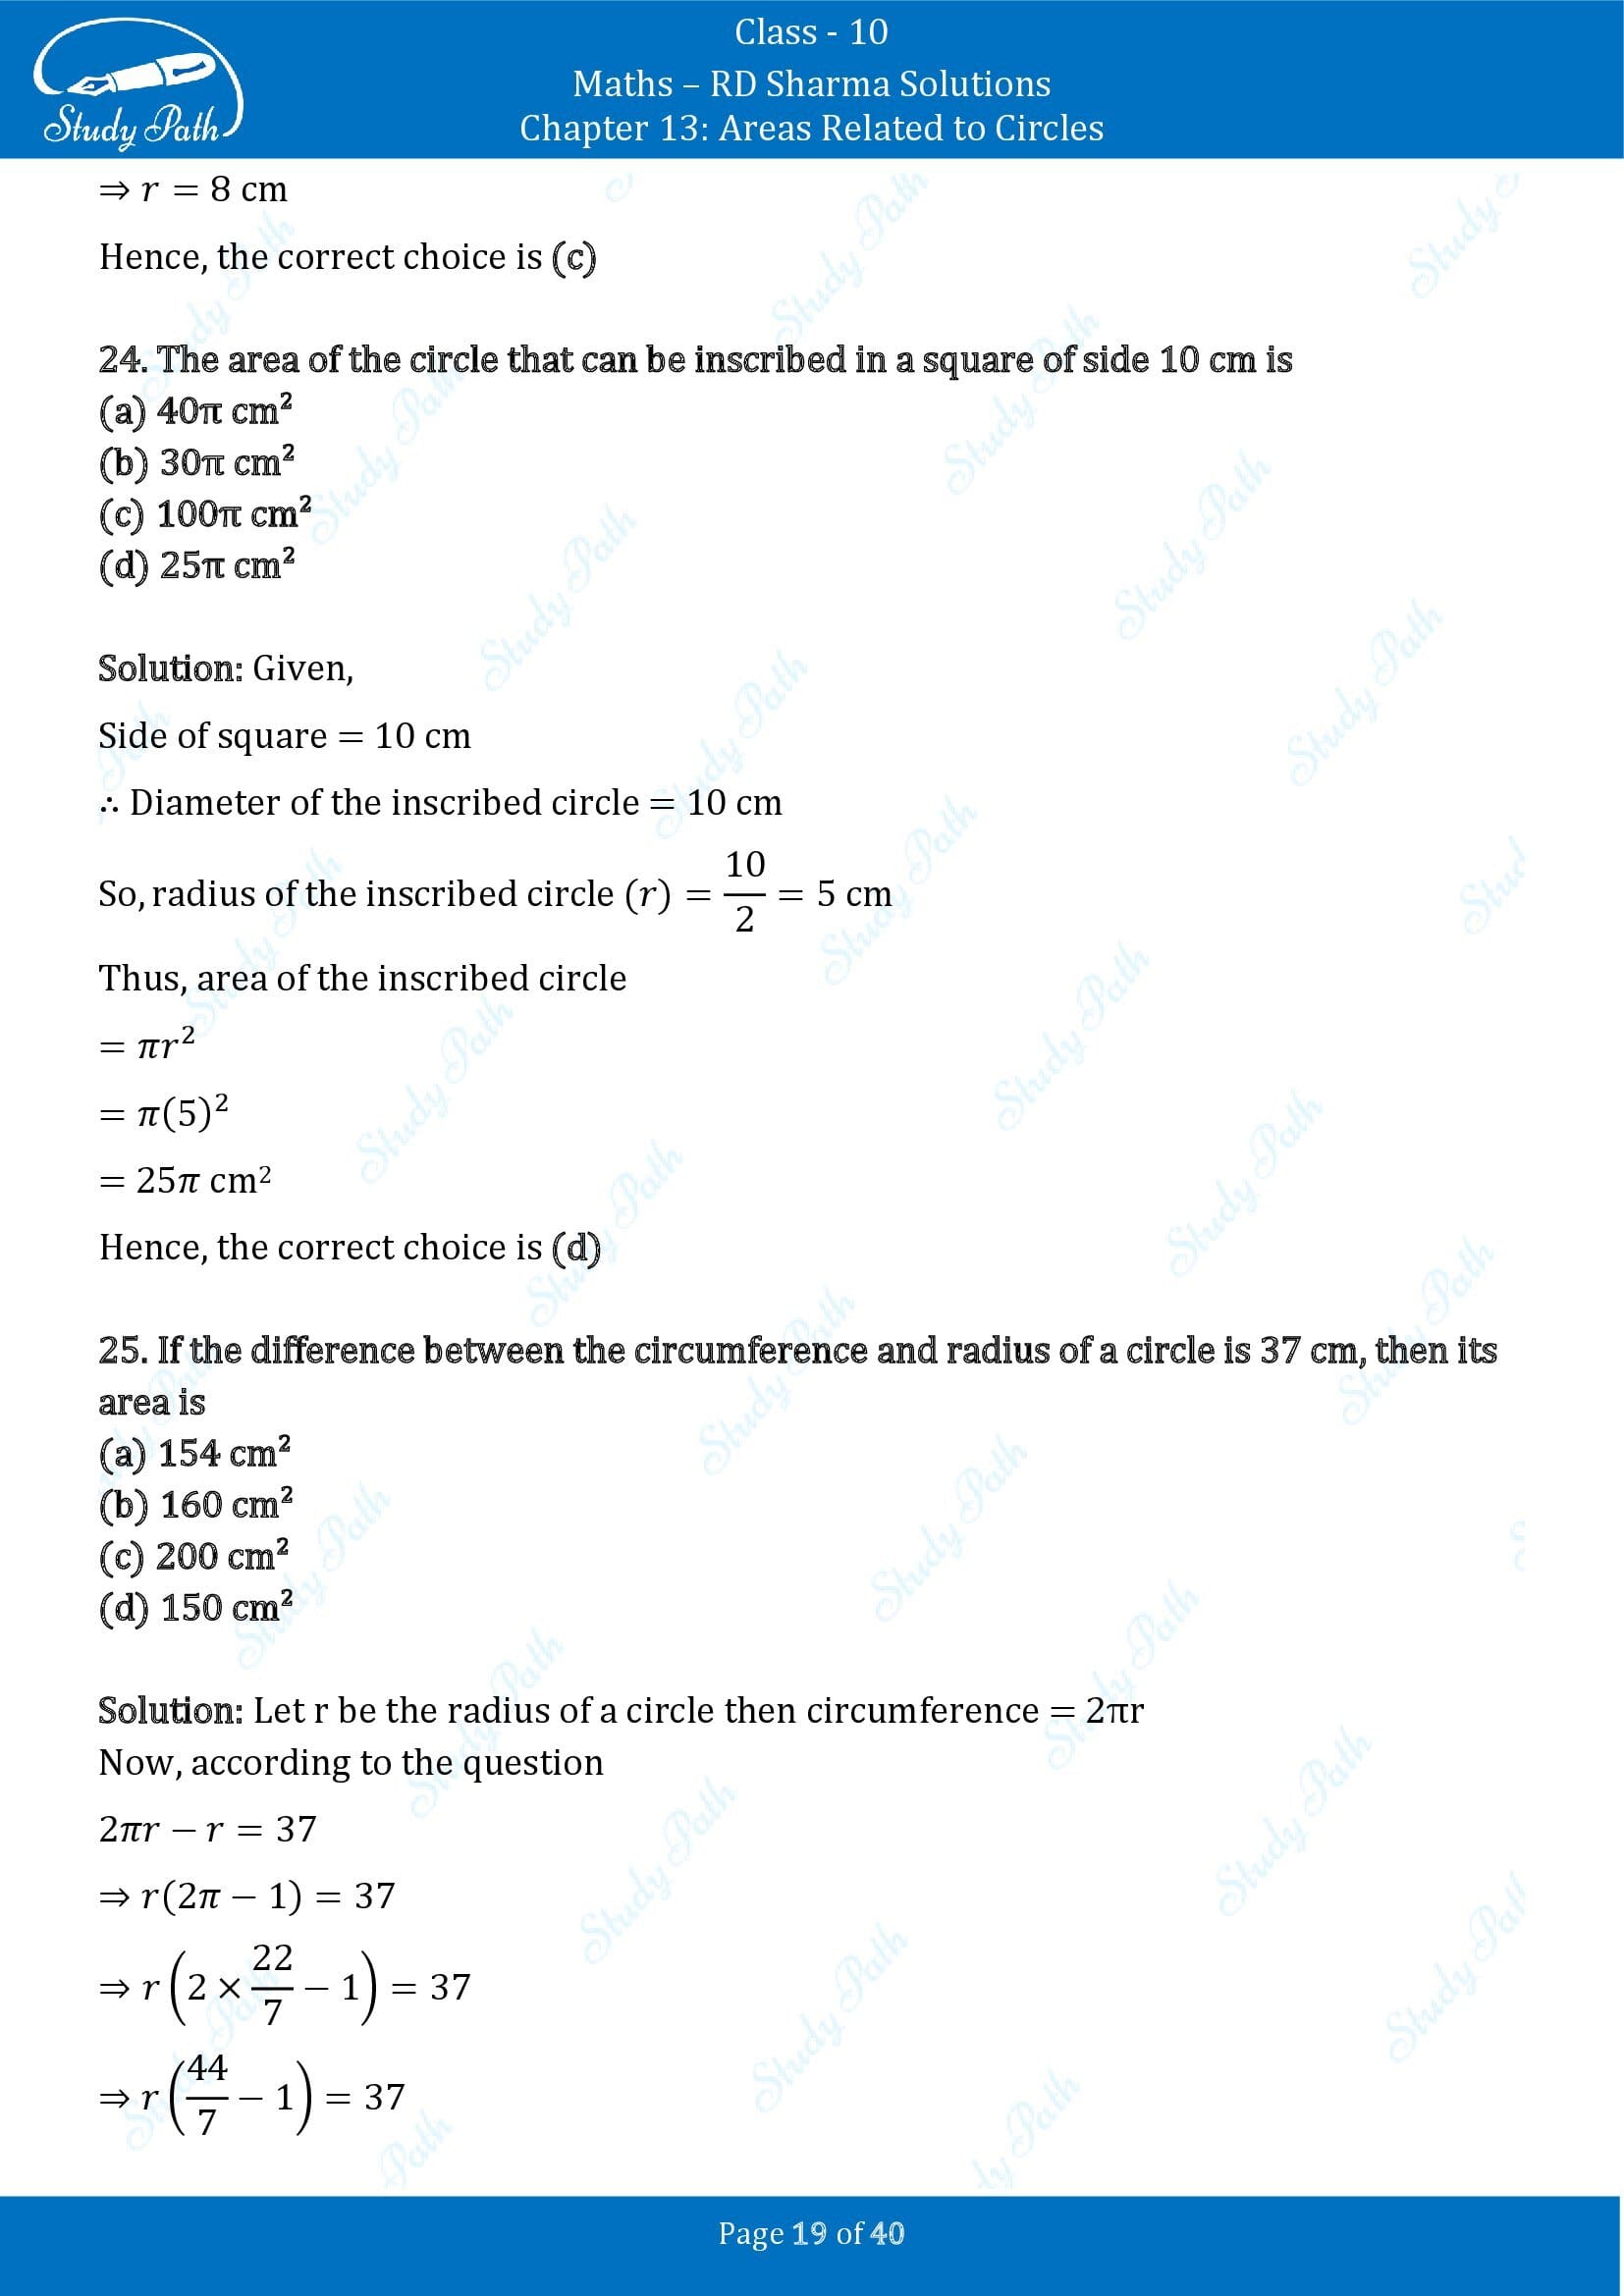 RD Sharma Solutions Class 10 Chapter 13 Areas Related to Circles Multiple Choice Question MCQs 00019